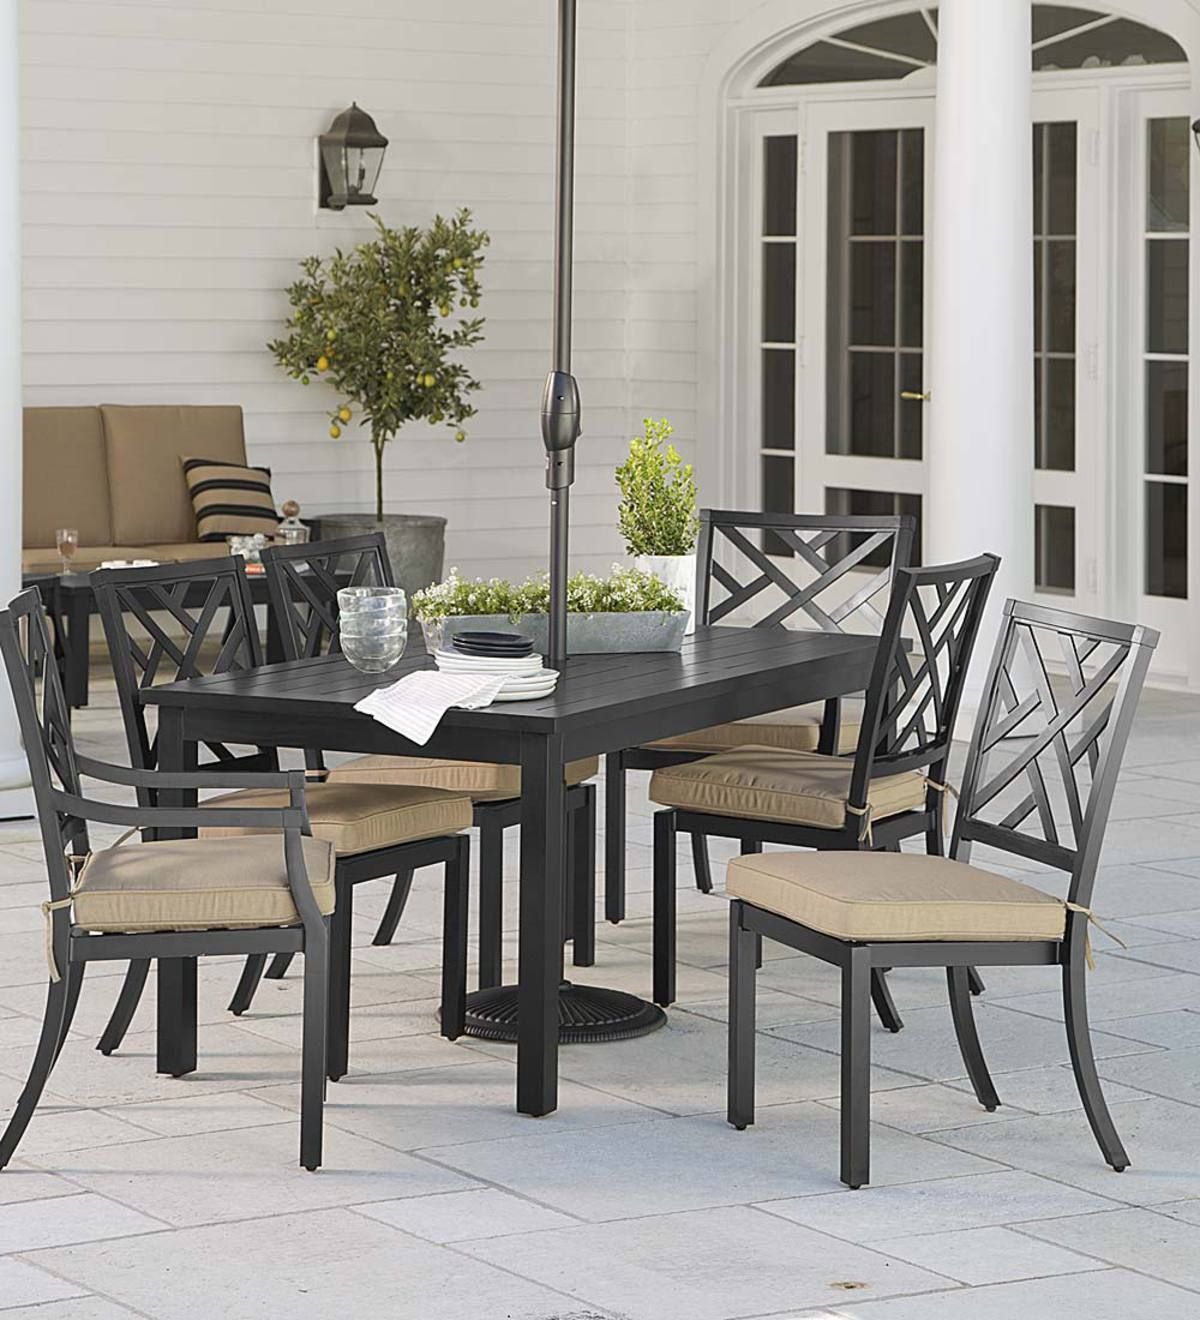 Recent Off White Cushion Patio Dining Sets With Regard To Chippendale Outdoor Dining Set With Cushions – Black With Heather Beige (View 15 of 15)